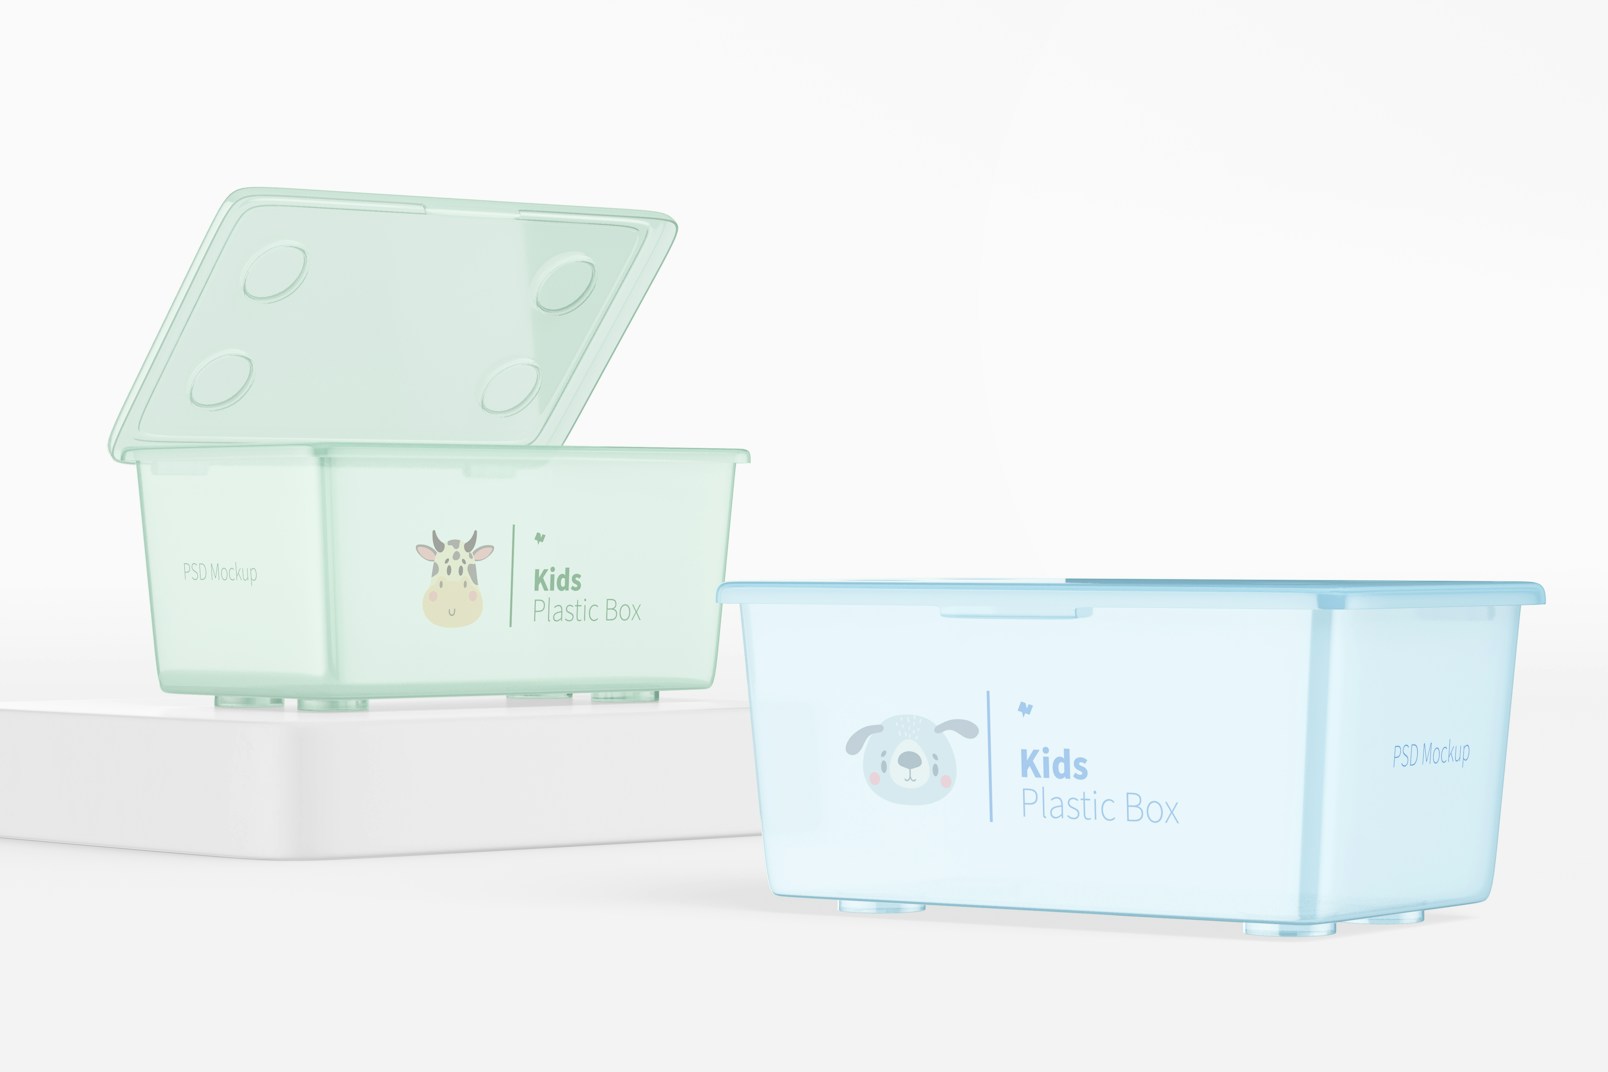 Kids Small Plastic Boxes with Lid Mockup, Perspective